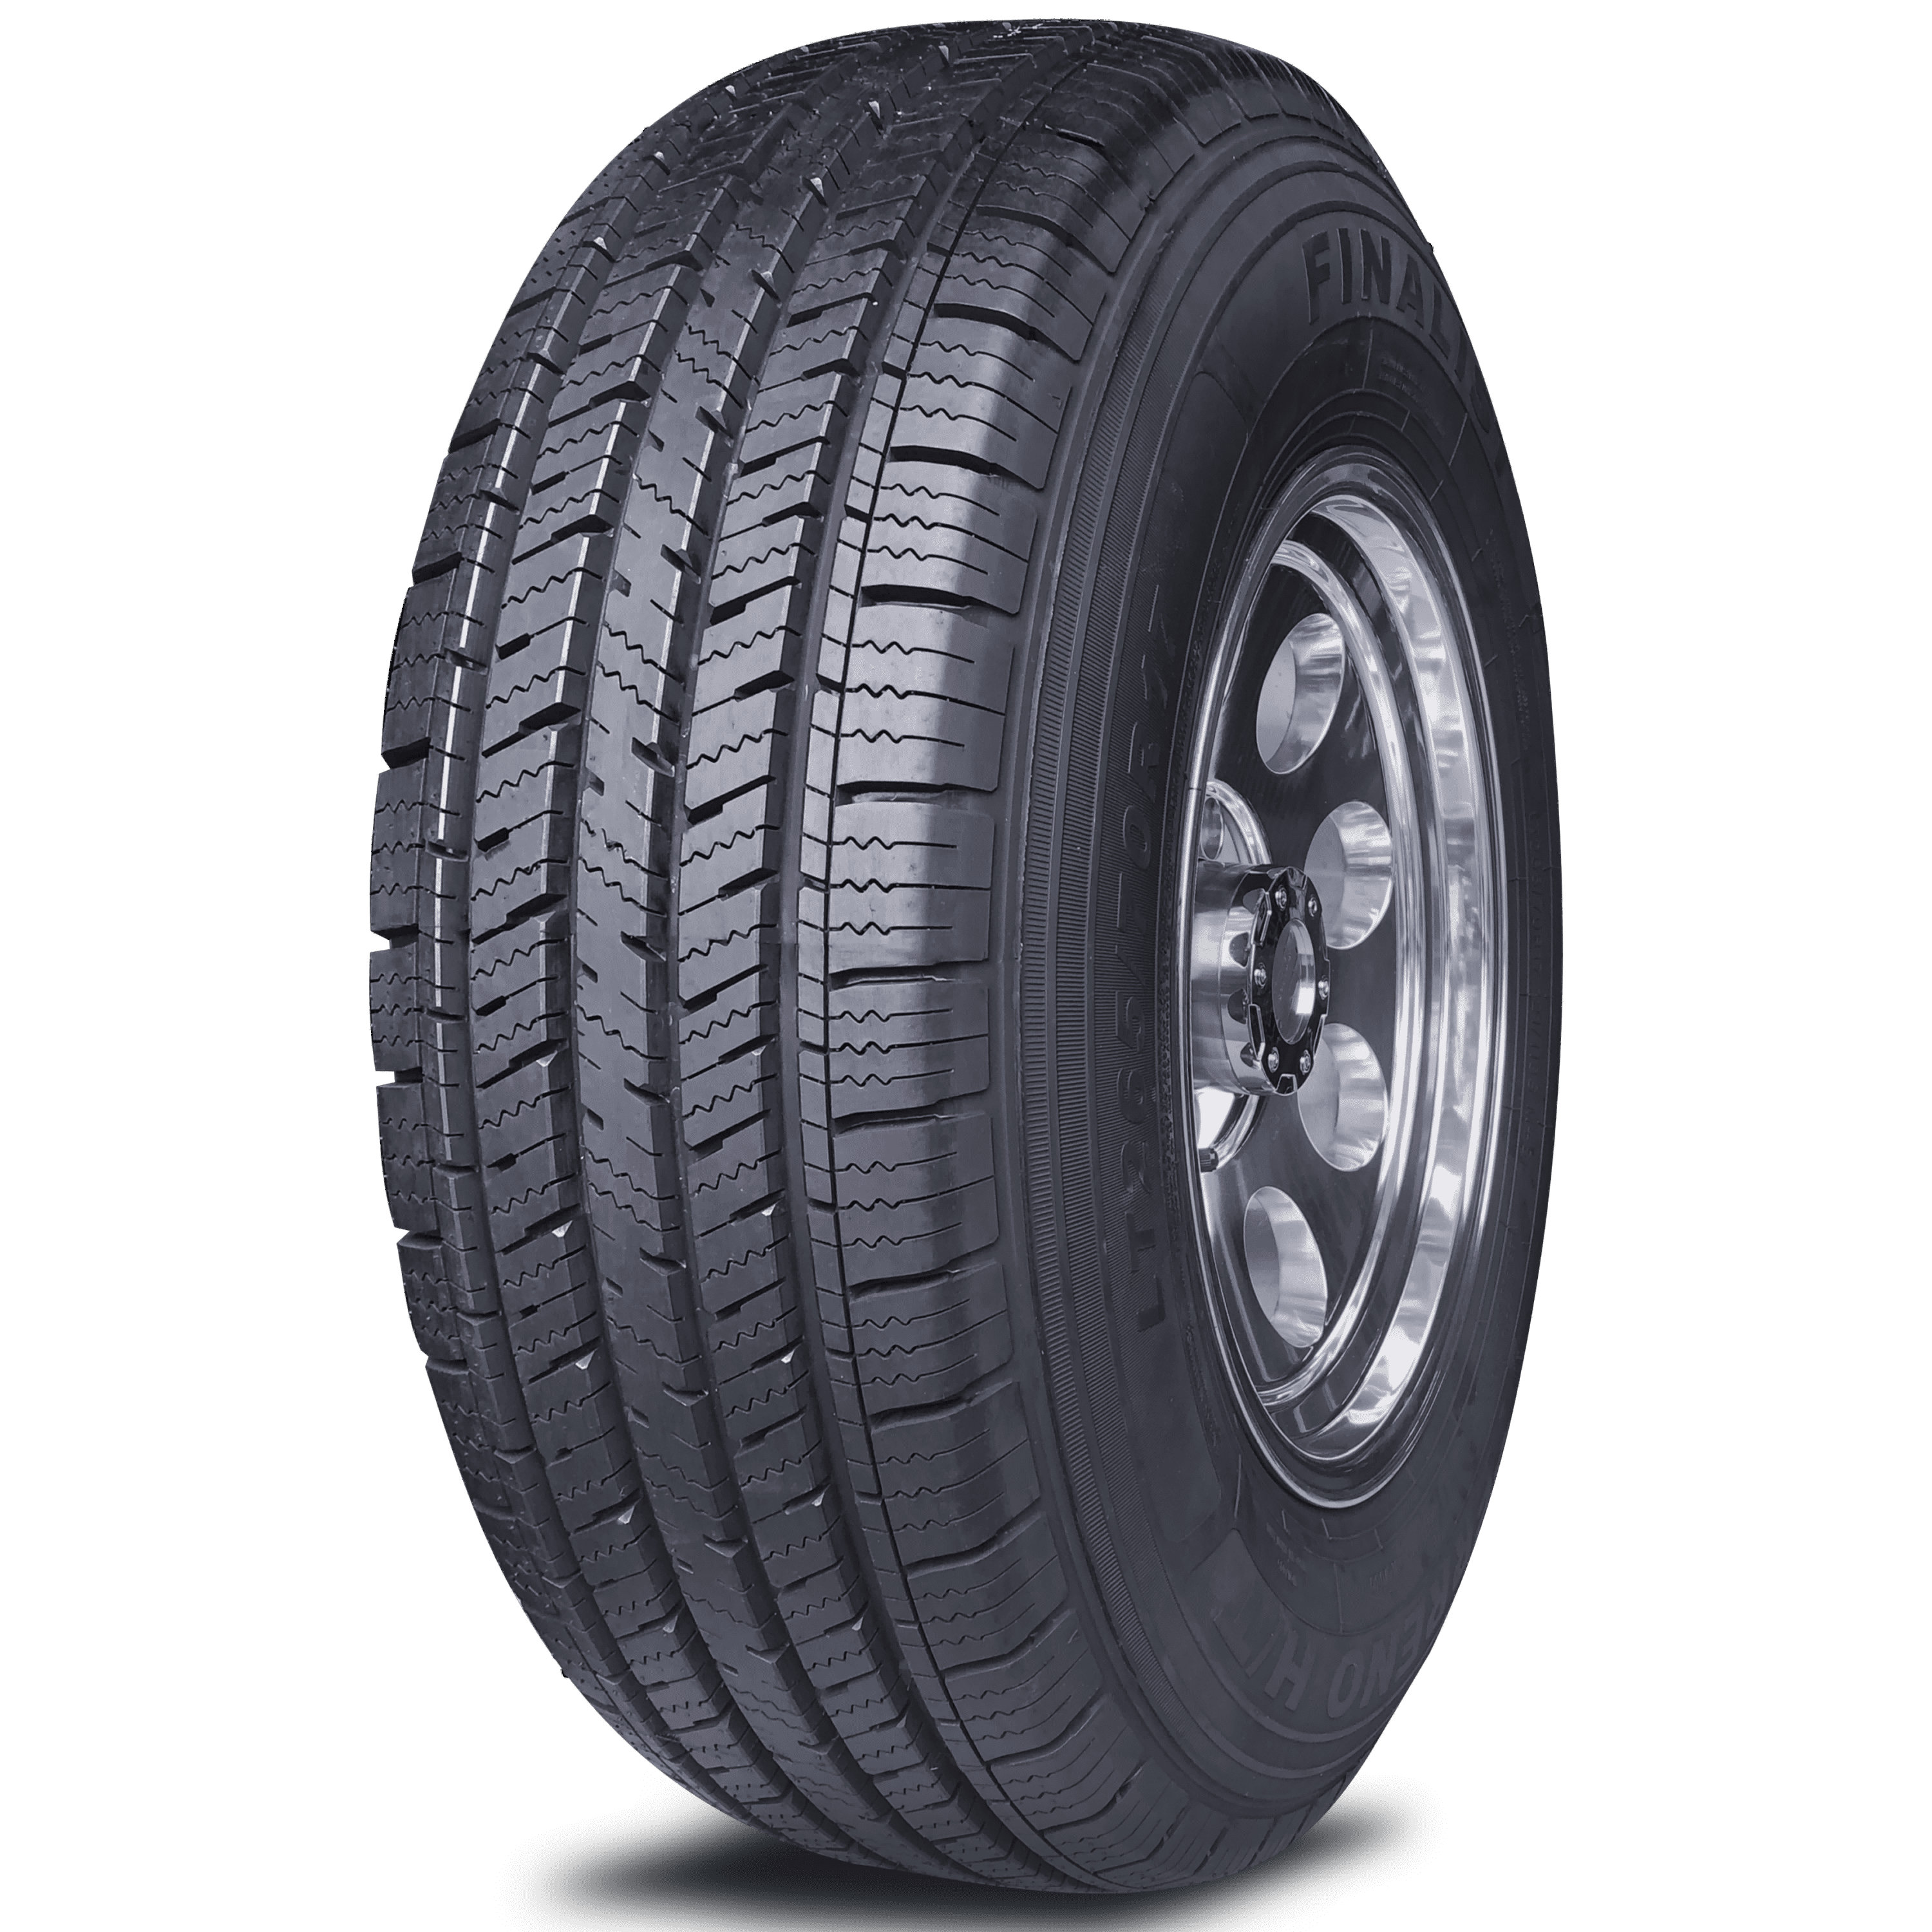 4X Tyres 235 65 R17  Hifly All Terrain HT SUV E C 72dB Deal of 4 Tyres 